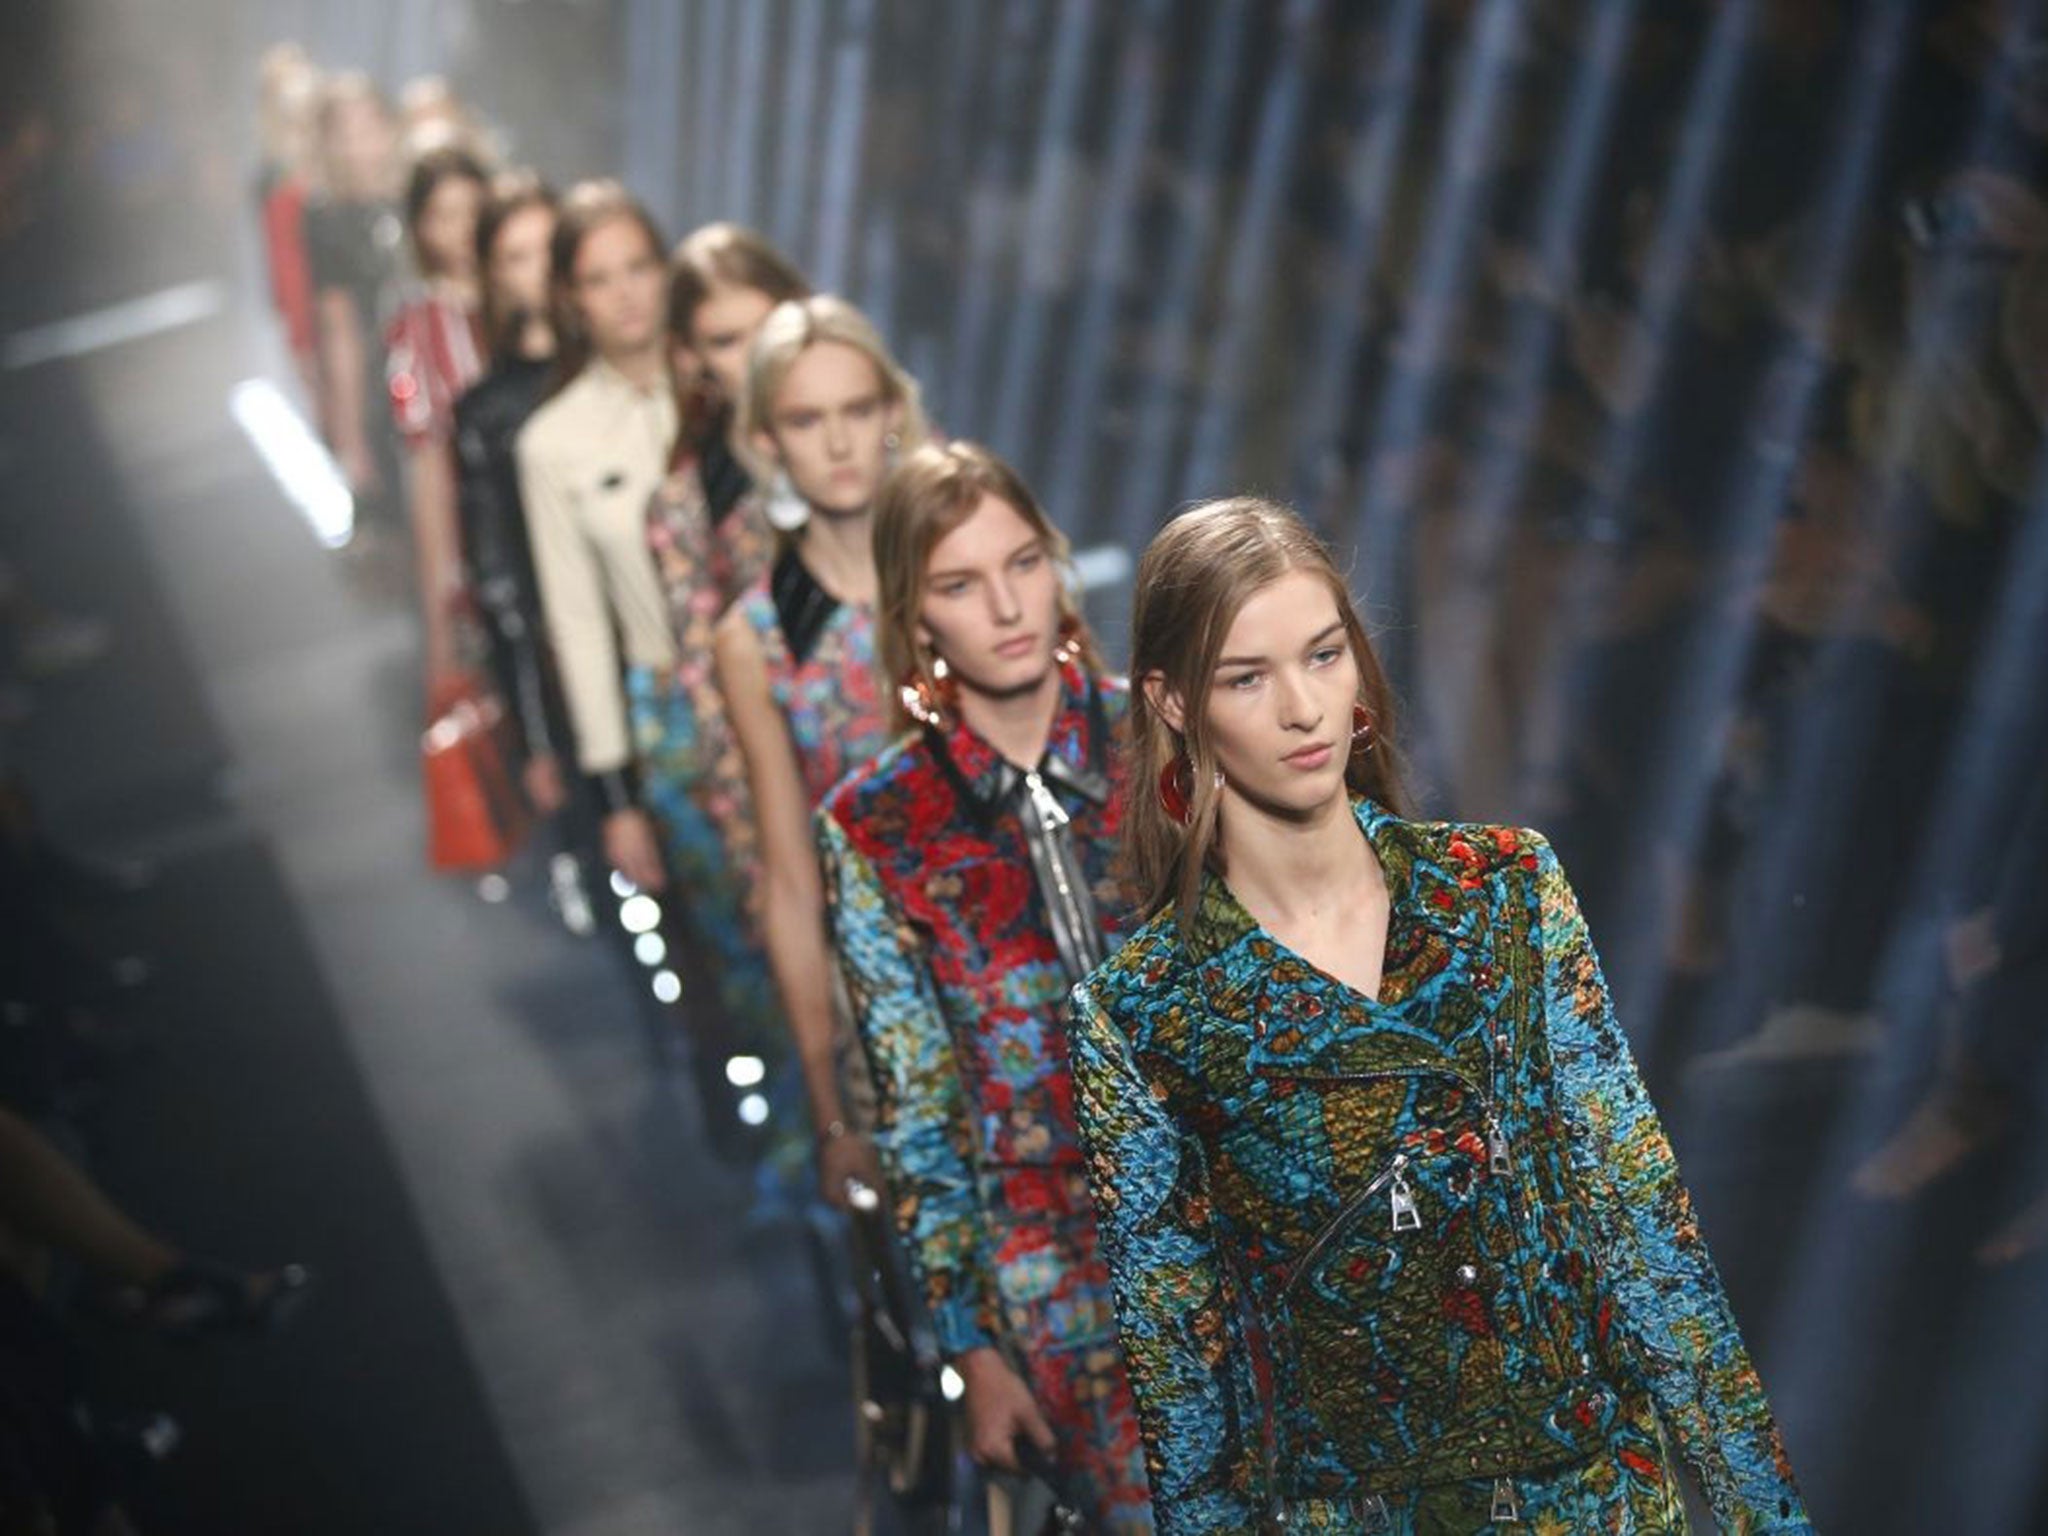 Louis Vuitton Spring 2014 Ready-to-Wear Collection